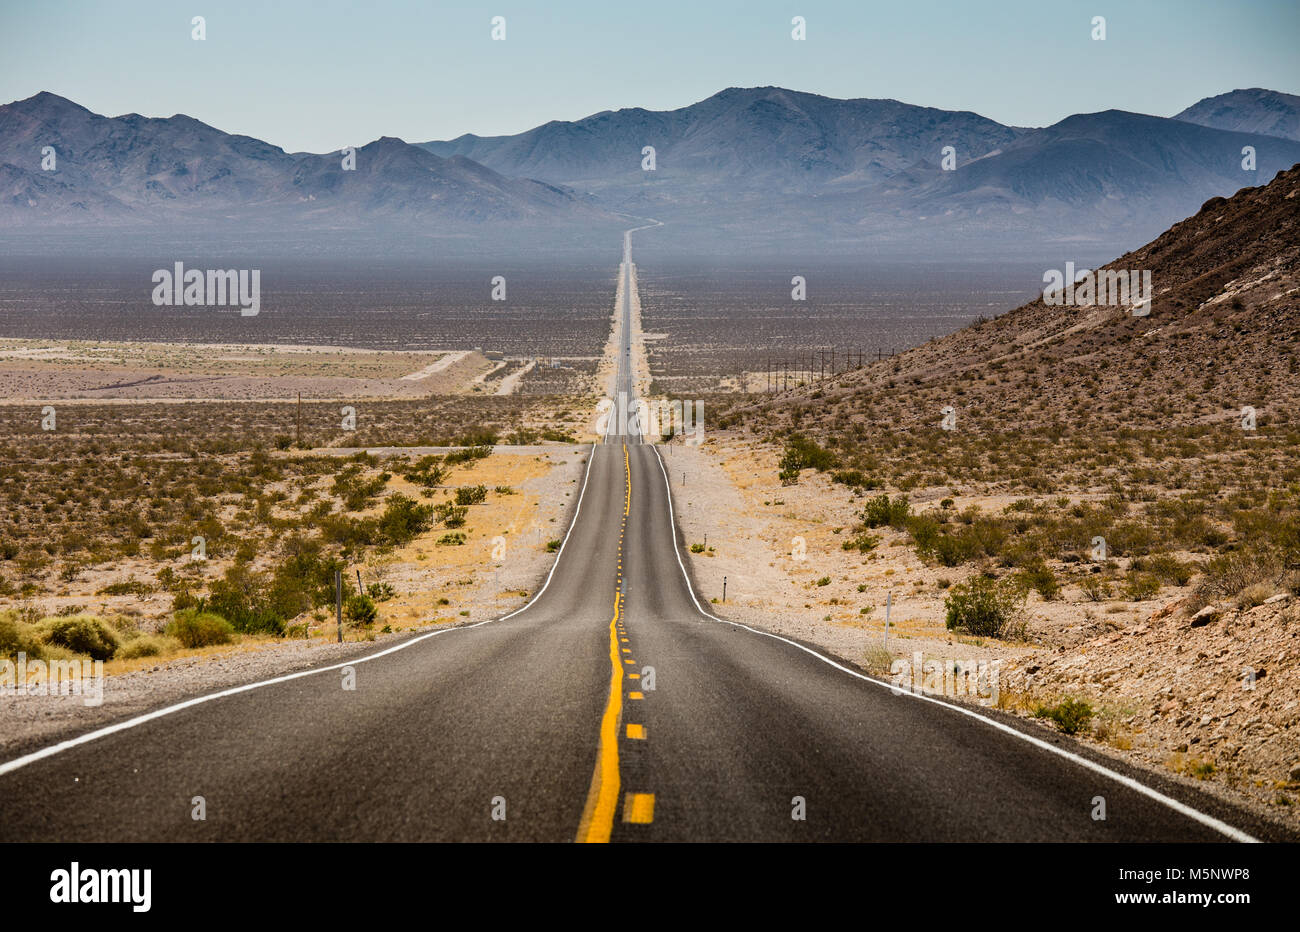 Classic panorama view of an endless straight road running through the barren scenery of the American Southwest with extreme heat haze on a beautiful s Stock Photo